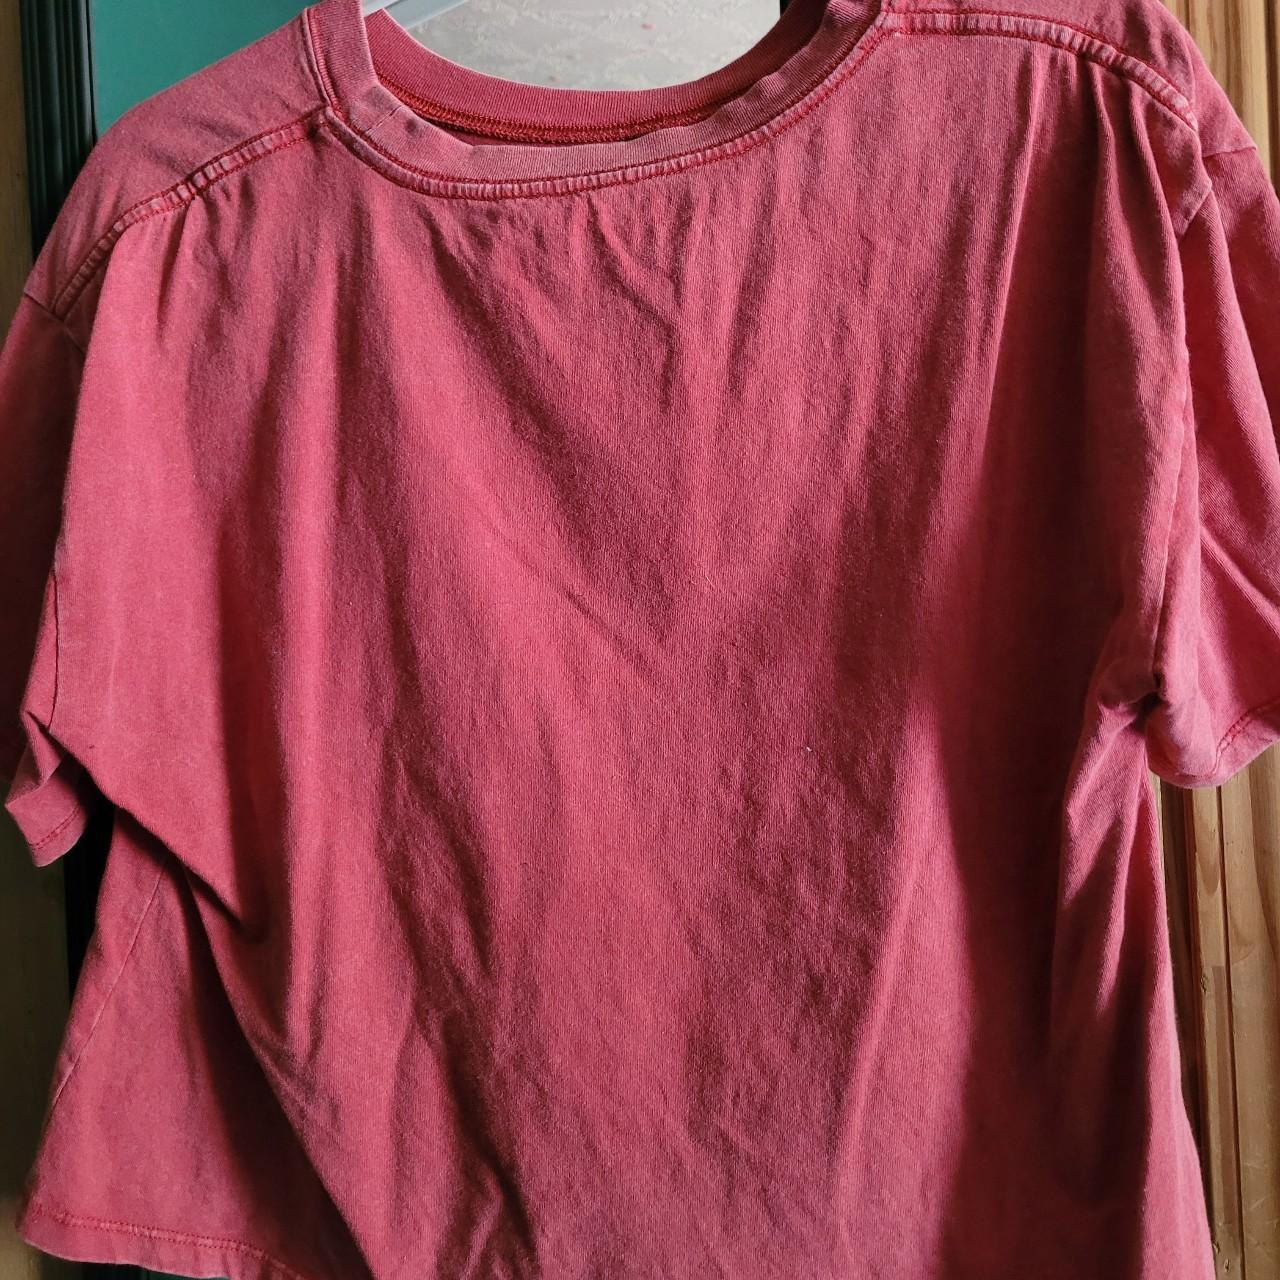 JCPenney Women's Pink and Silver Crop-top | Depop